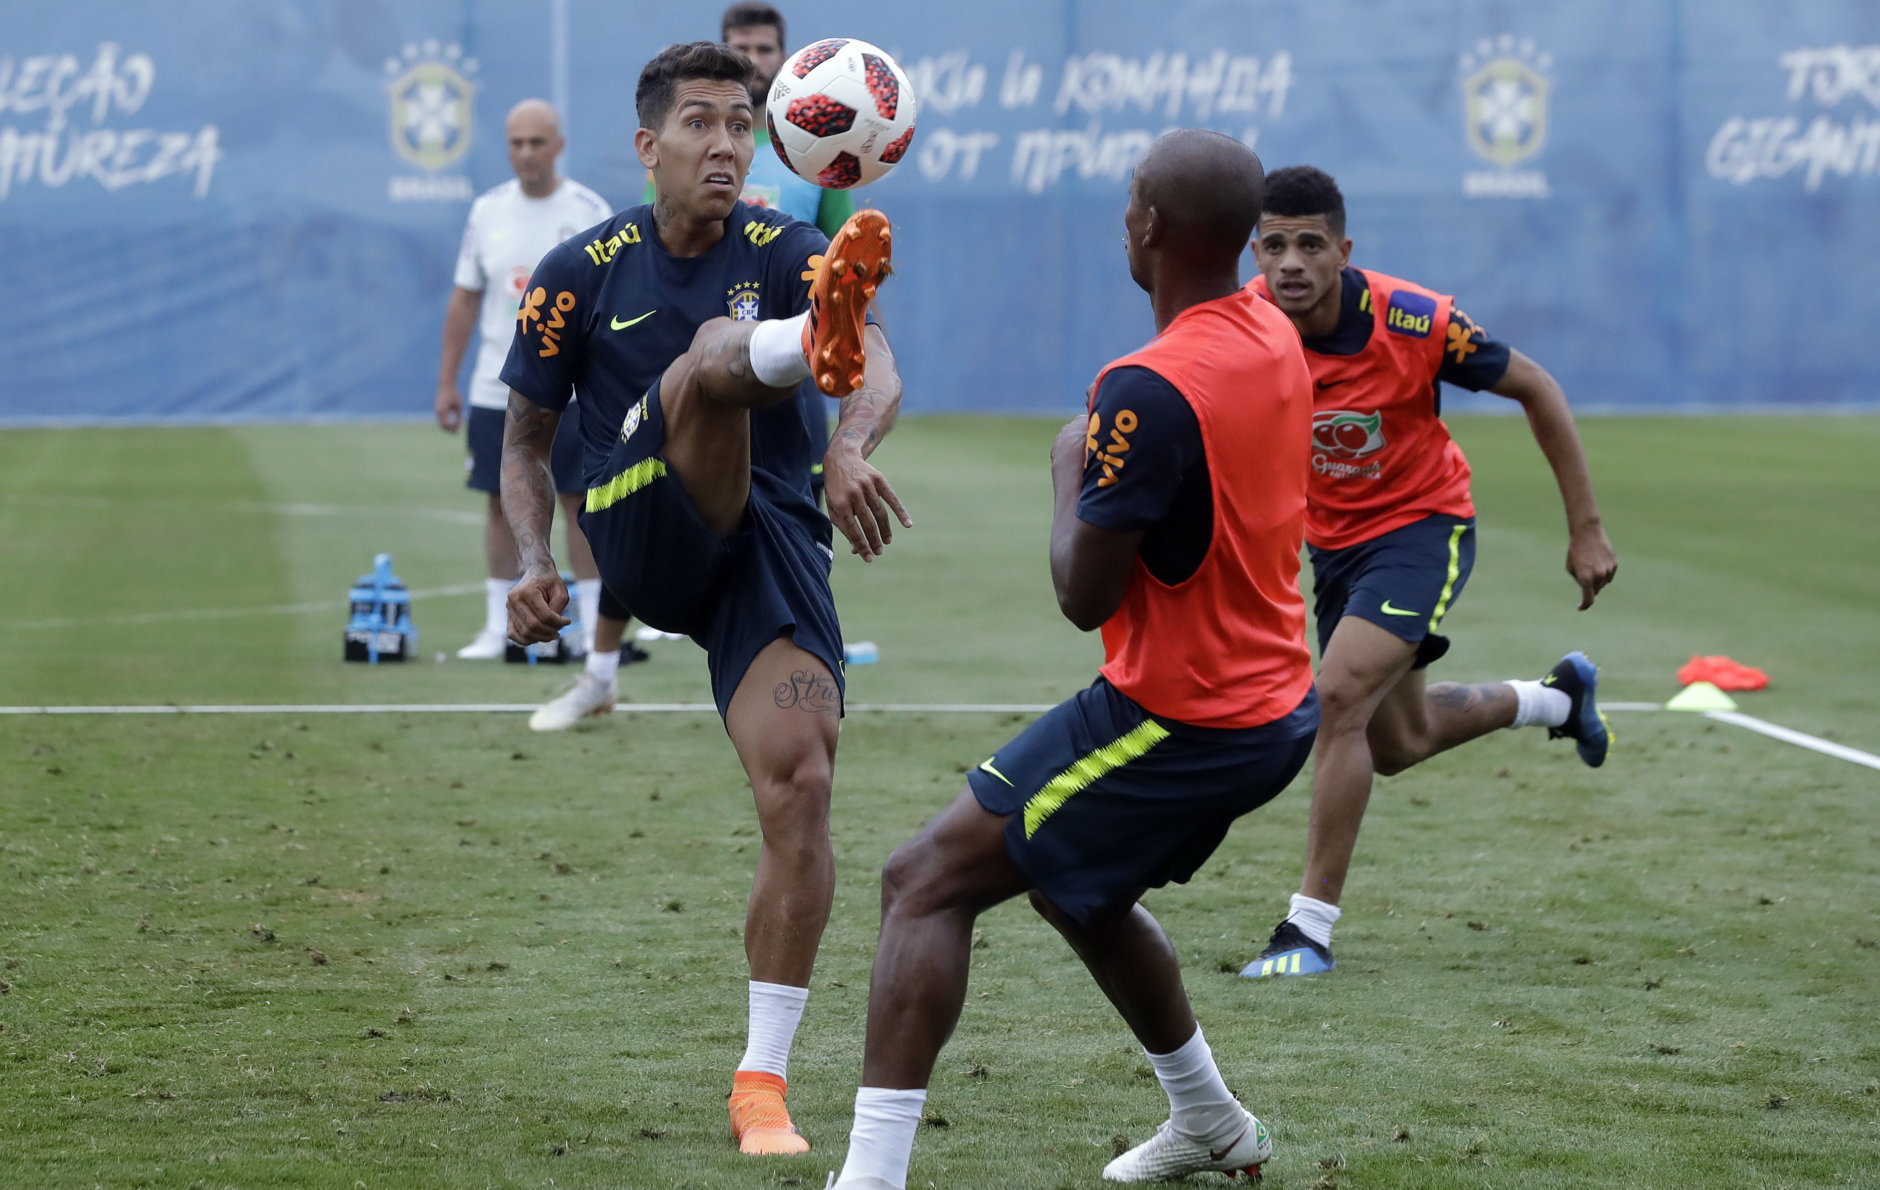 Brazil's Roberto Firmino, left, Fernandinho, center, and Taison practice during a training session, in Sochi, Russia, Tuesday, July 3, 2018. Brazil will face Belgium on July 6 in the quarterfinals for the soccer World Cup. (AP Photo/Andre Penner)